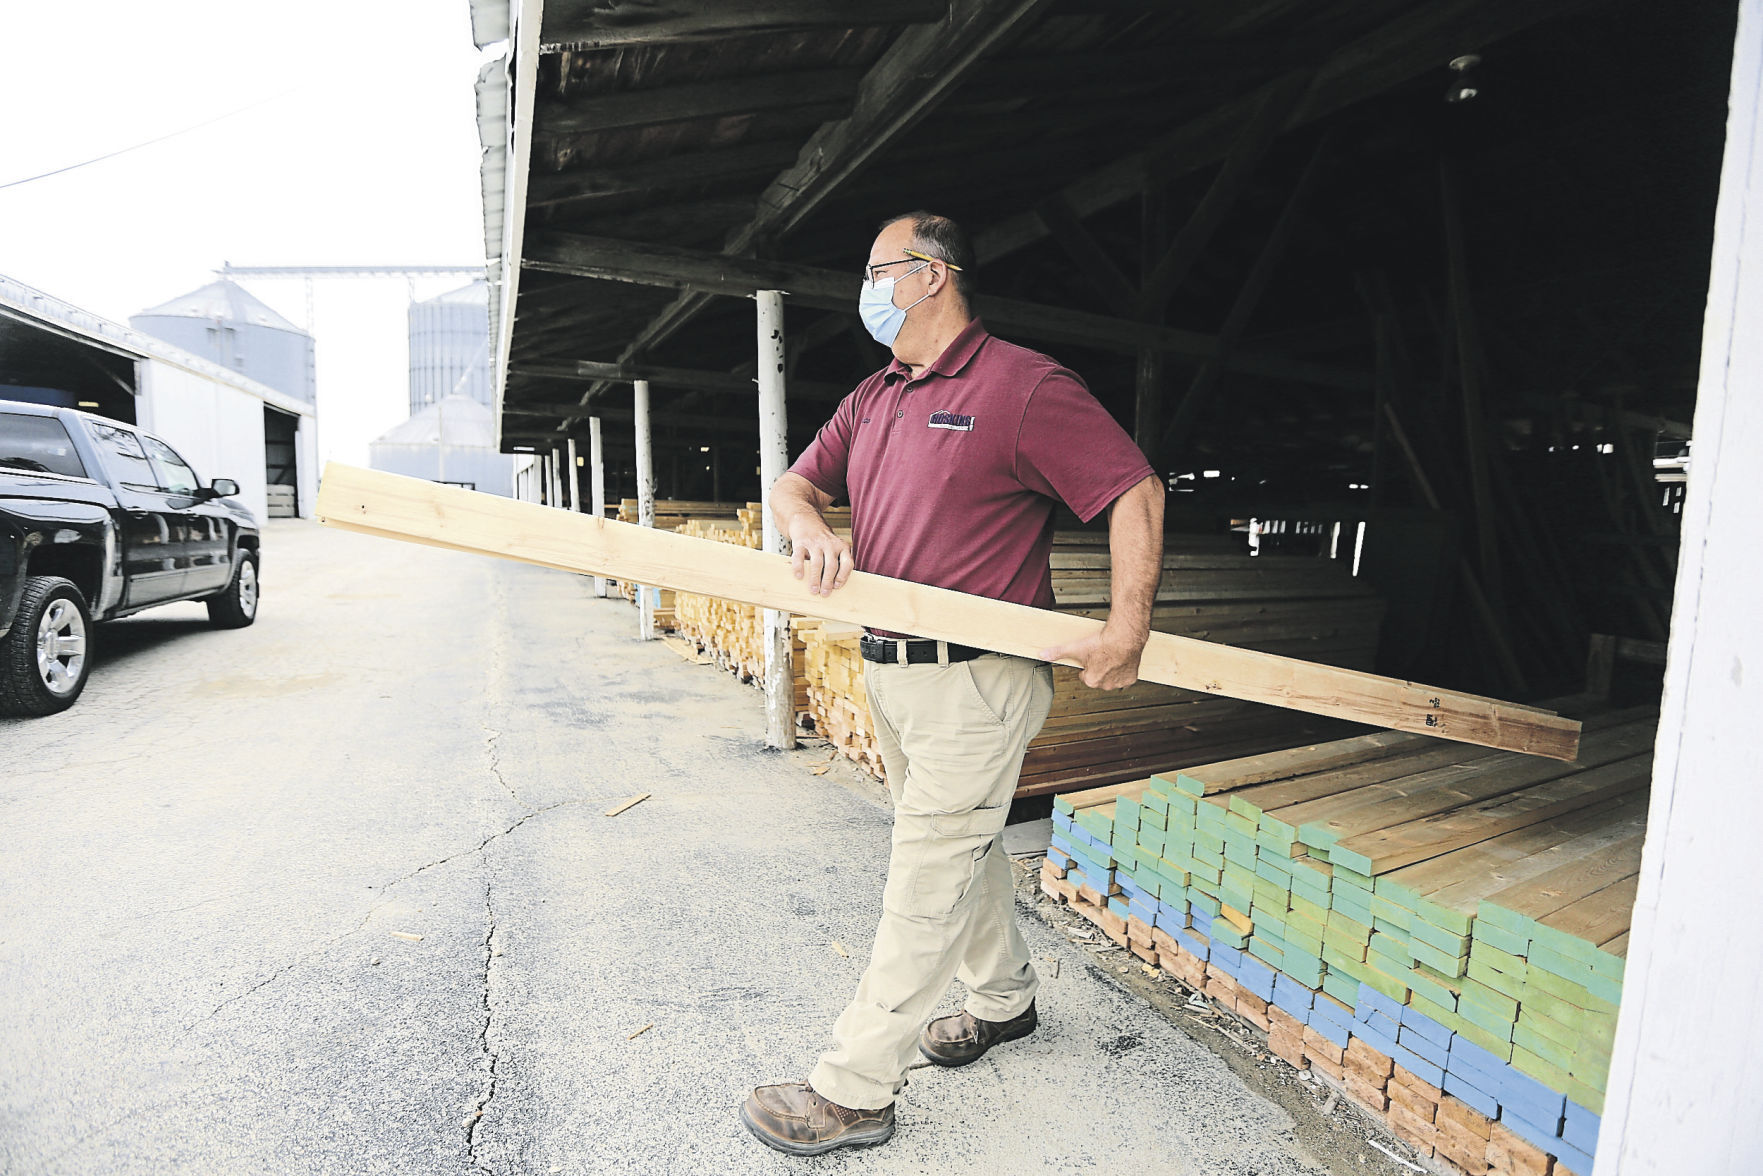 Pete Korth, a salesman with Hoskins Building Center, helps load some lumber. The longtime Elizabeth, Ill., business, began 167 years ago. Williams Hoskins opened it after finding success in the Gold Rush.    PHOTO CREDIT: Dave Kettering